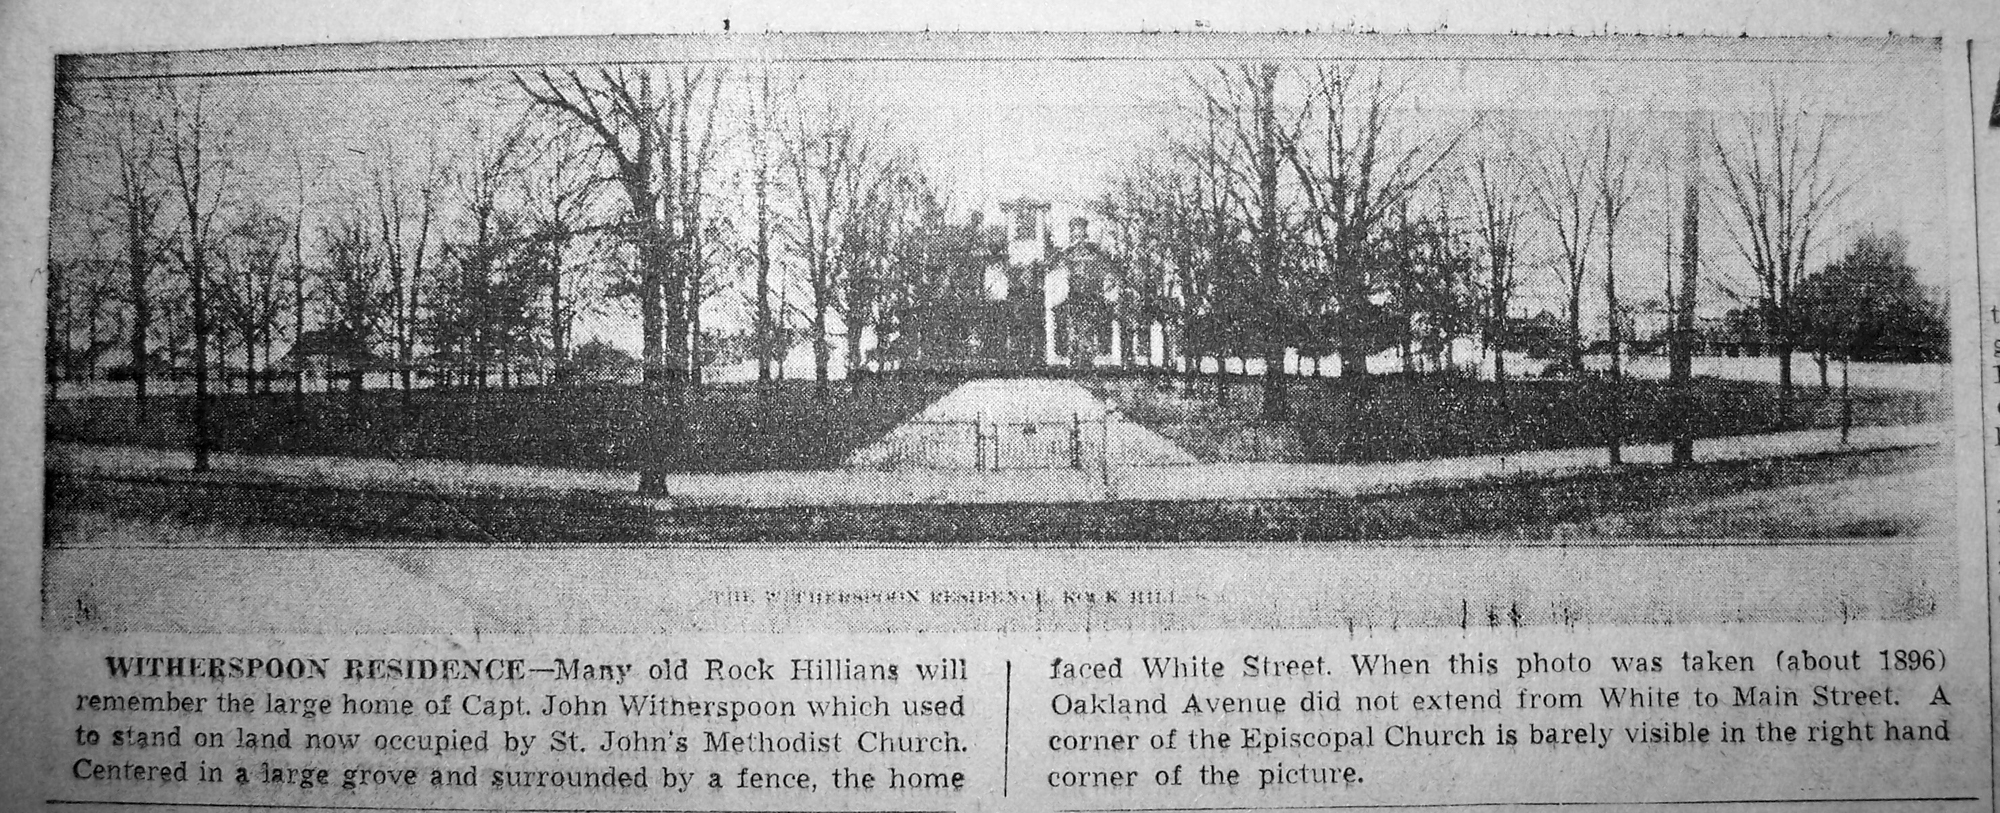 NEWSPAPER VIEW OF THE WHITERSPOON HOME - 1890s